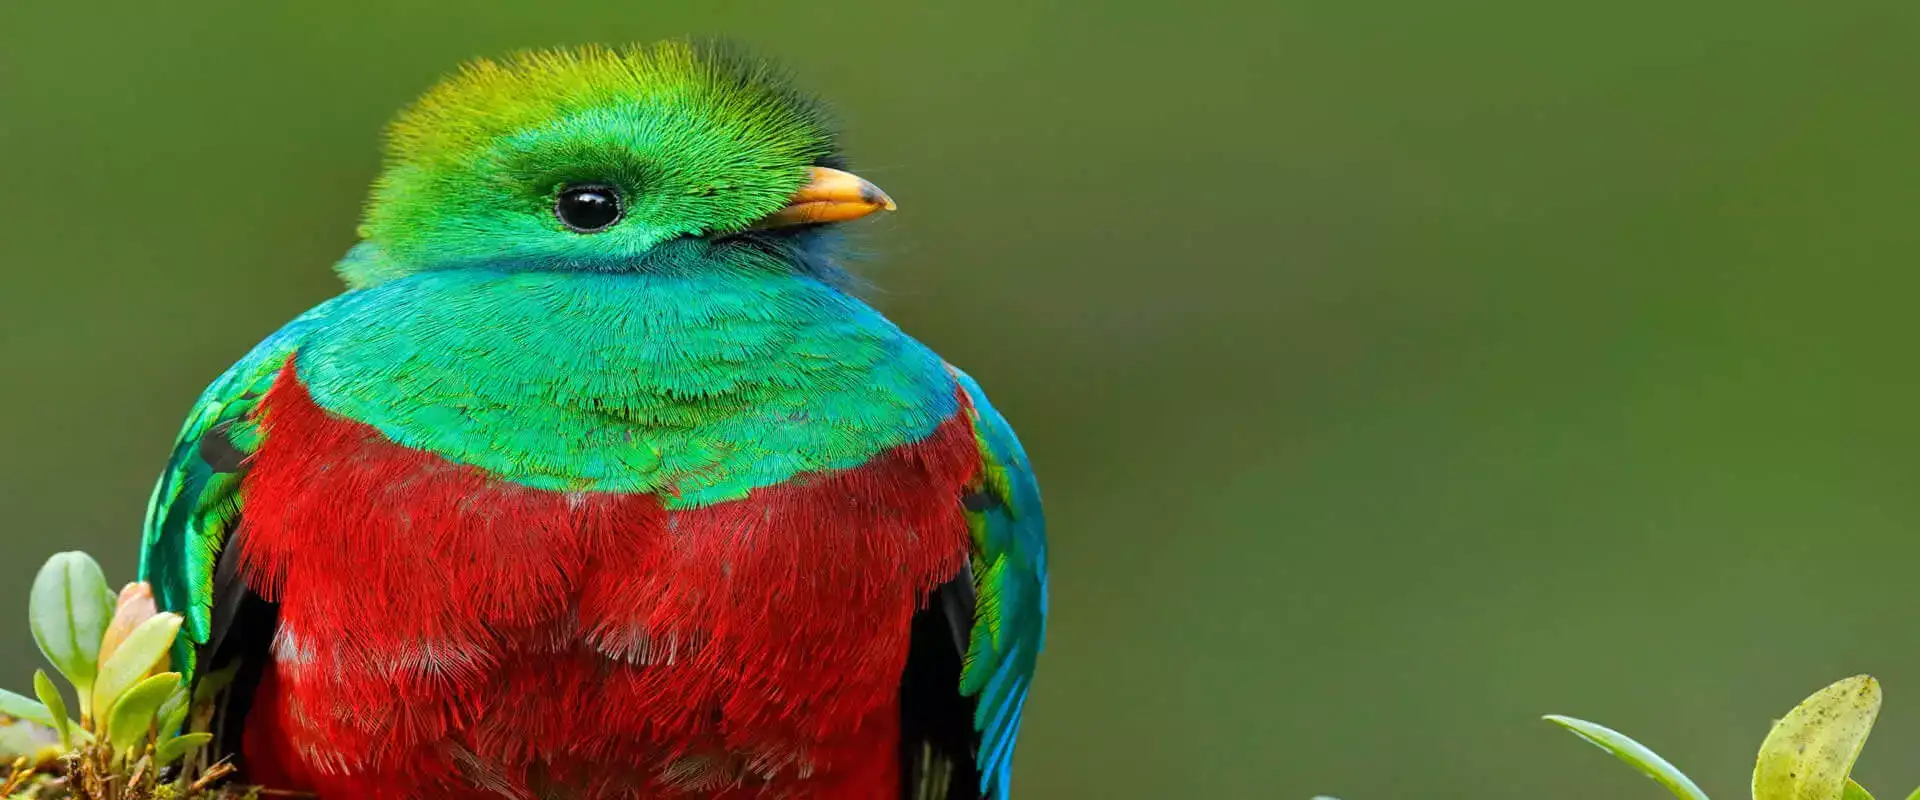 Quetzal and Highland Expedition Bird Watching Tour | Costa Rica